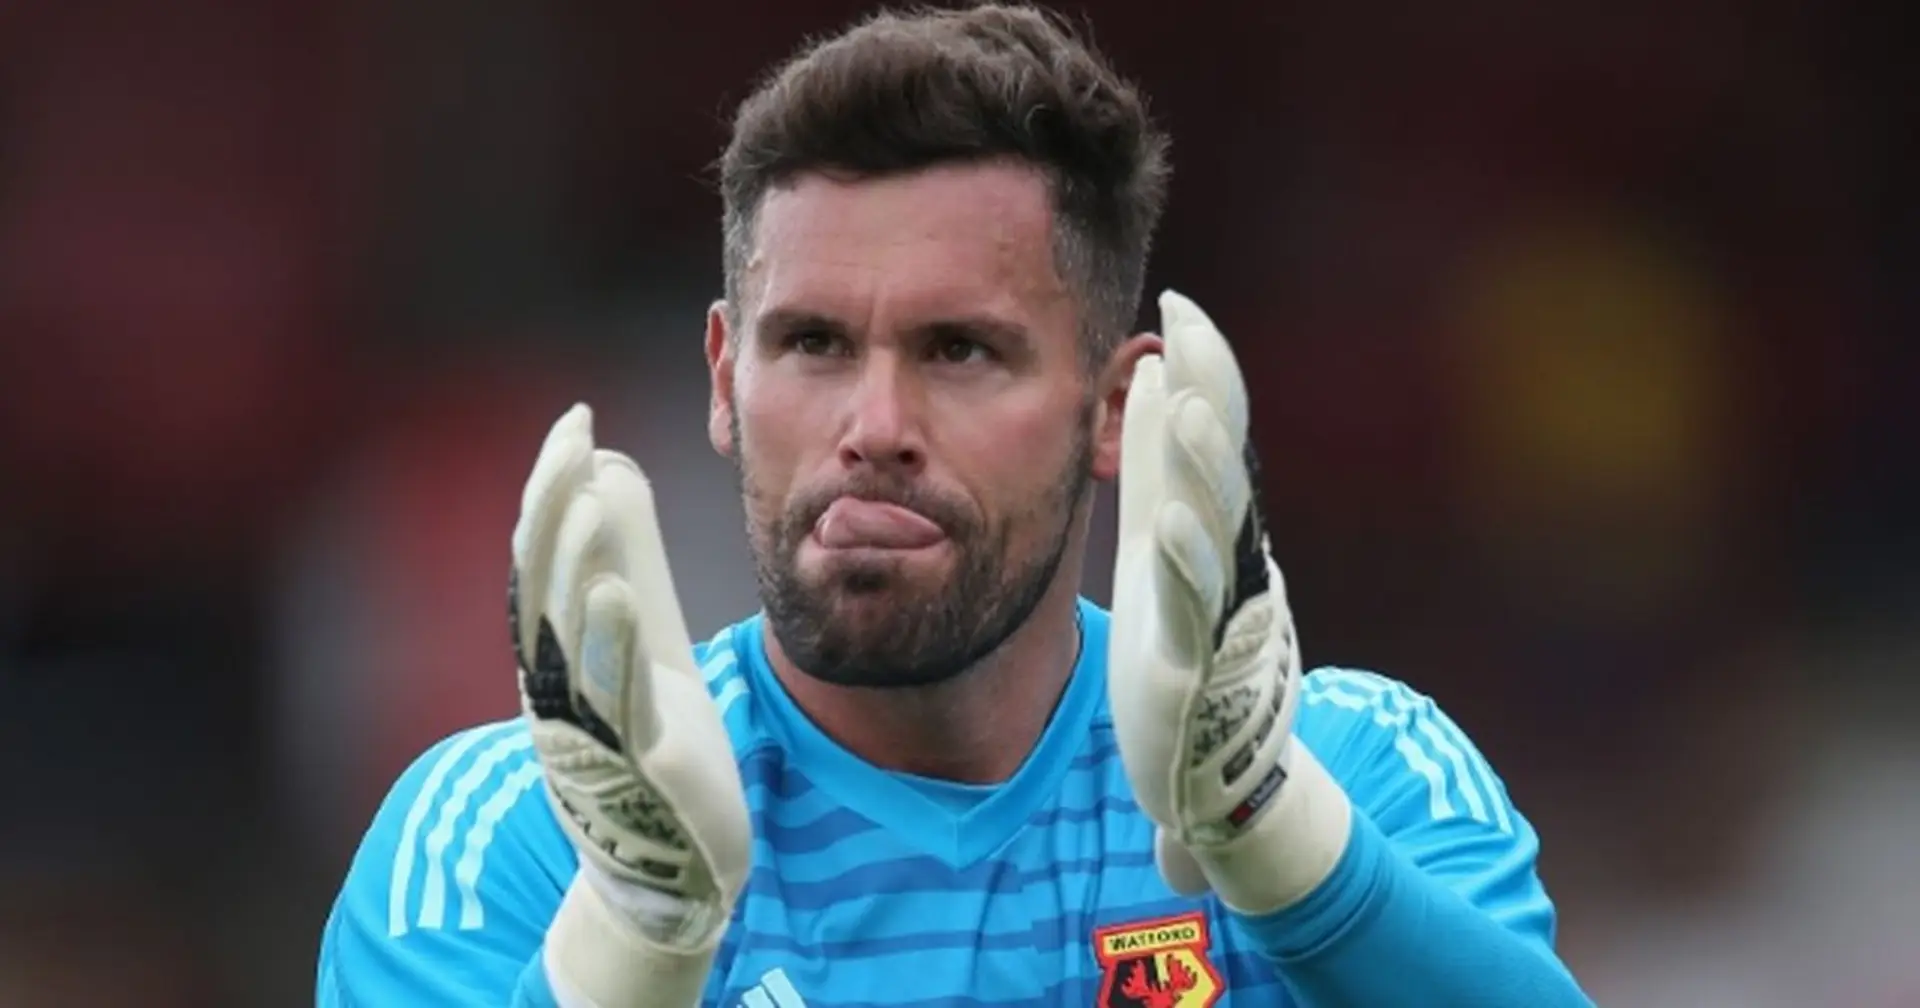 'Give me Ben Foster any day of the week': ex-Sunderland striker Phillips wants Liverpool to sign Watford man